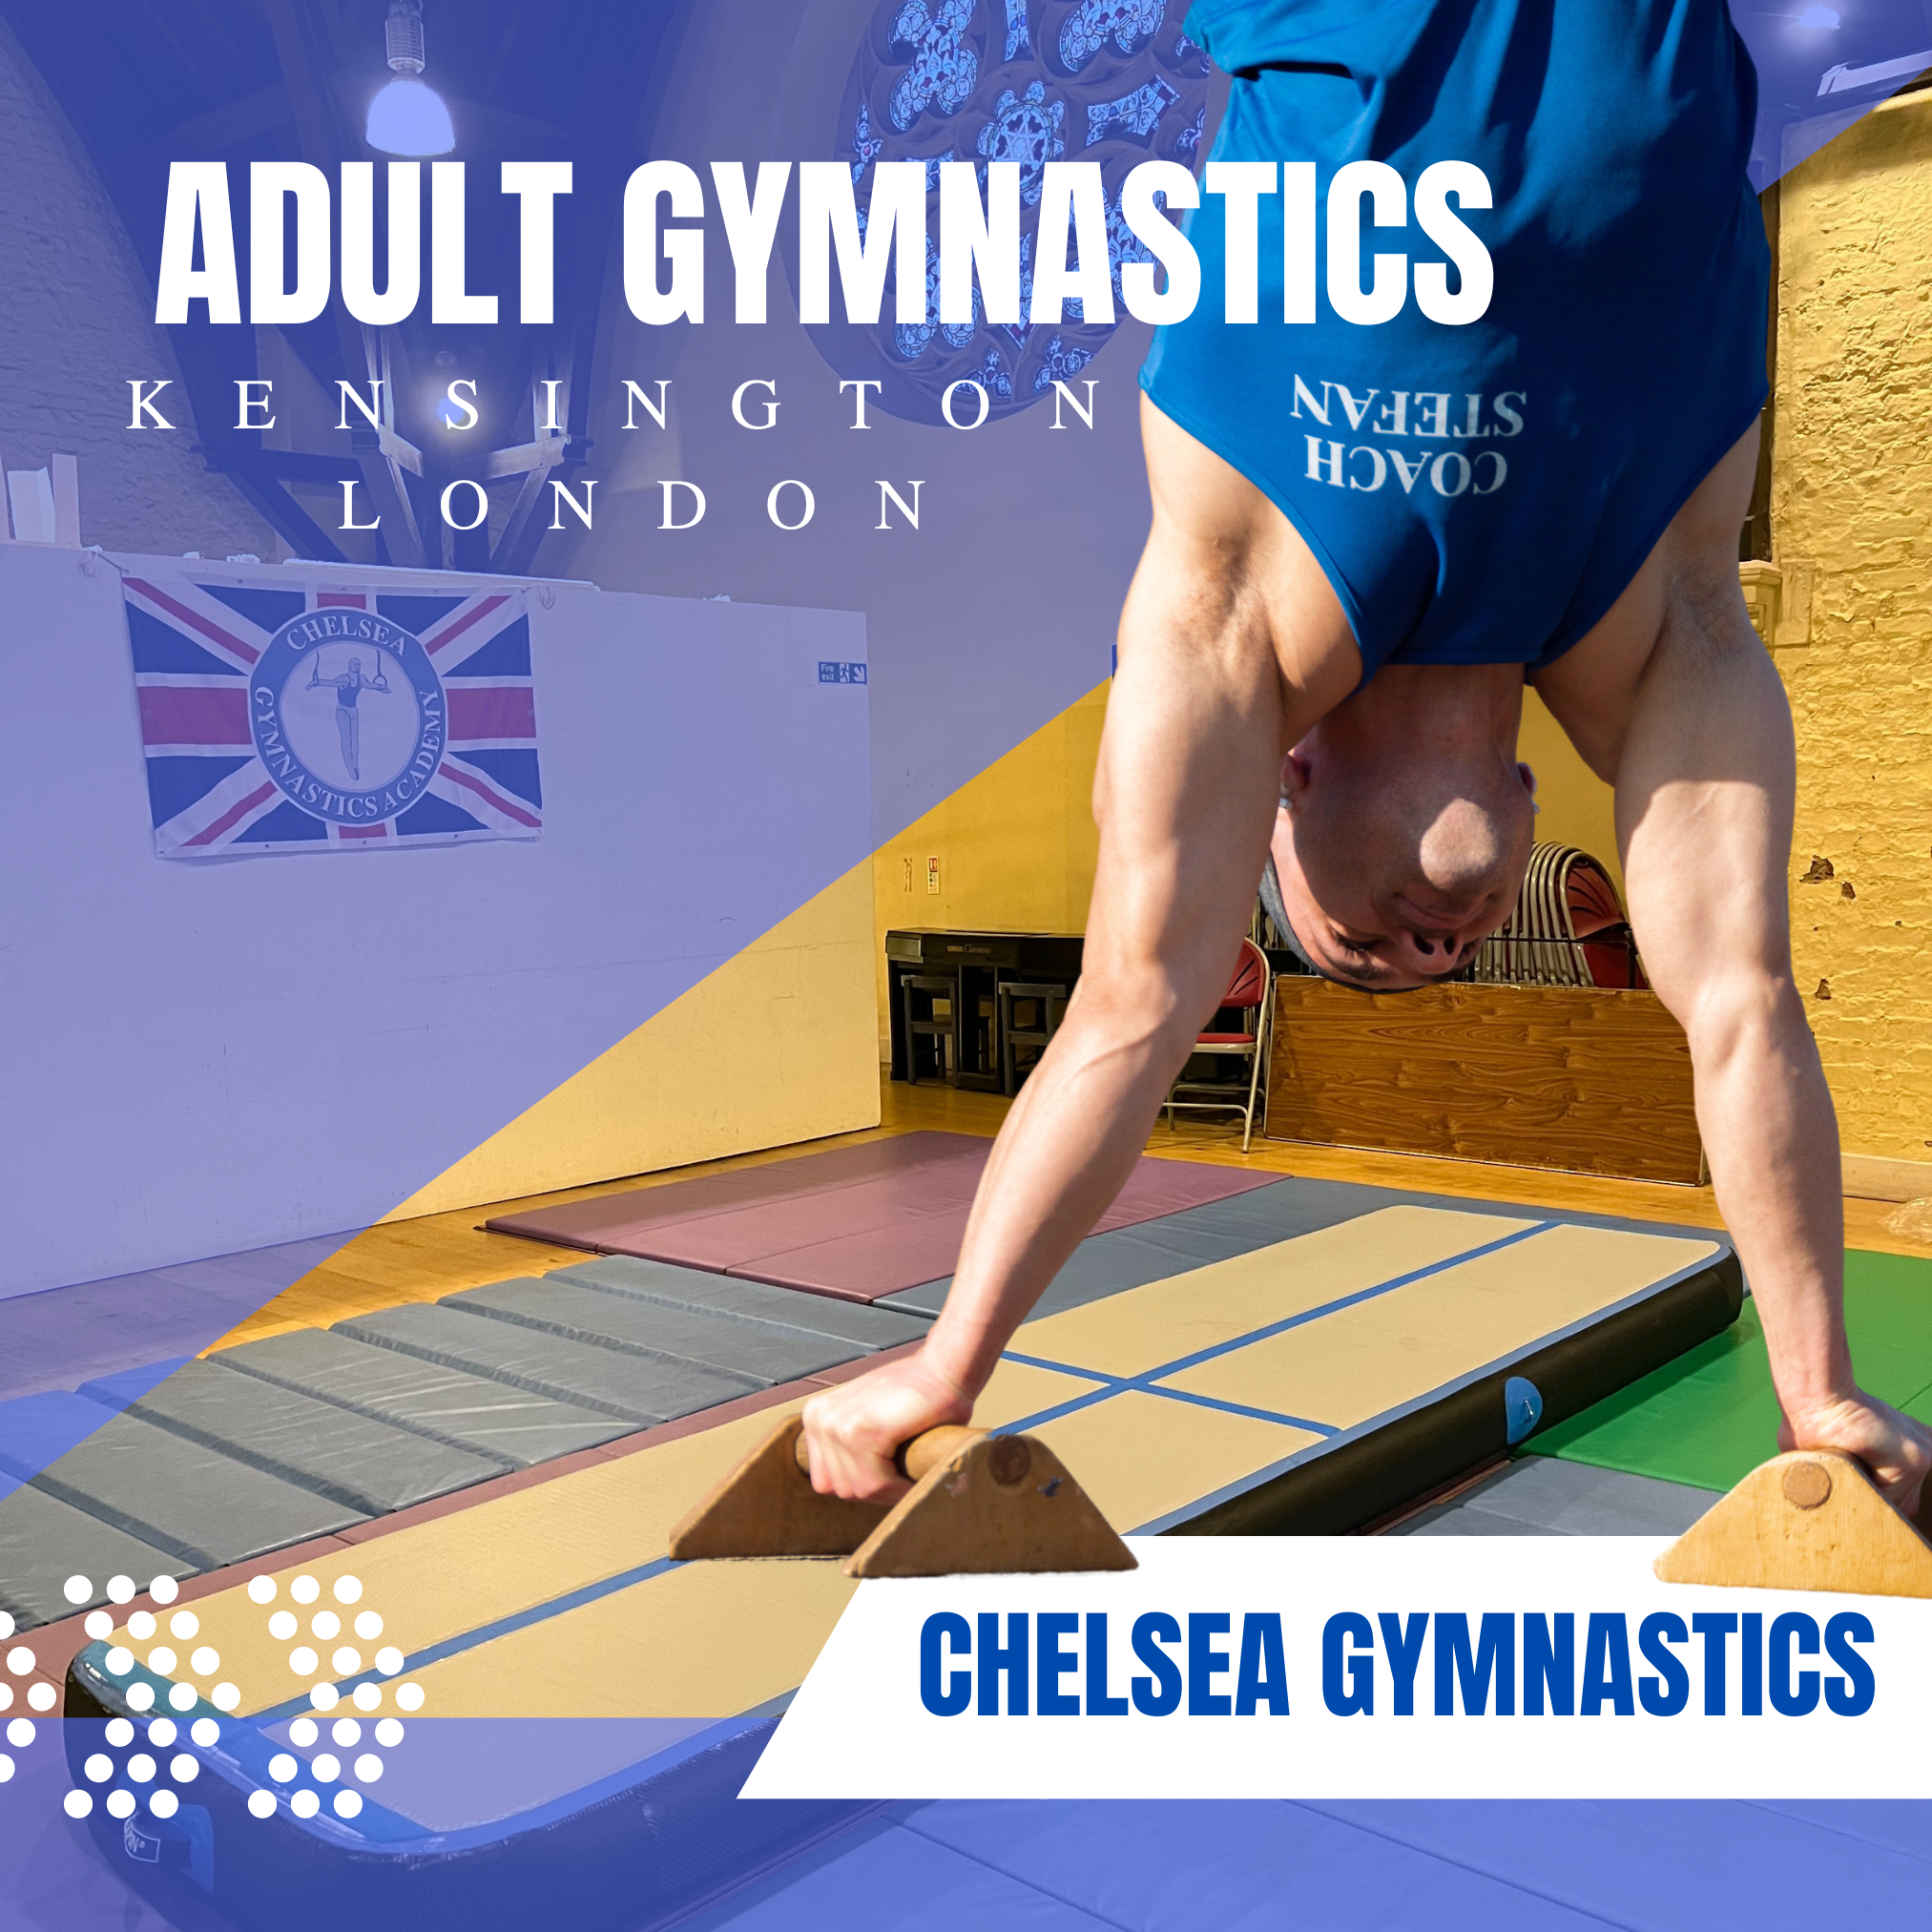 Group and Personal Gymnastics Sessions for Adults in Kensington and Chelsea in London with a Professional coach